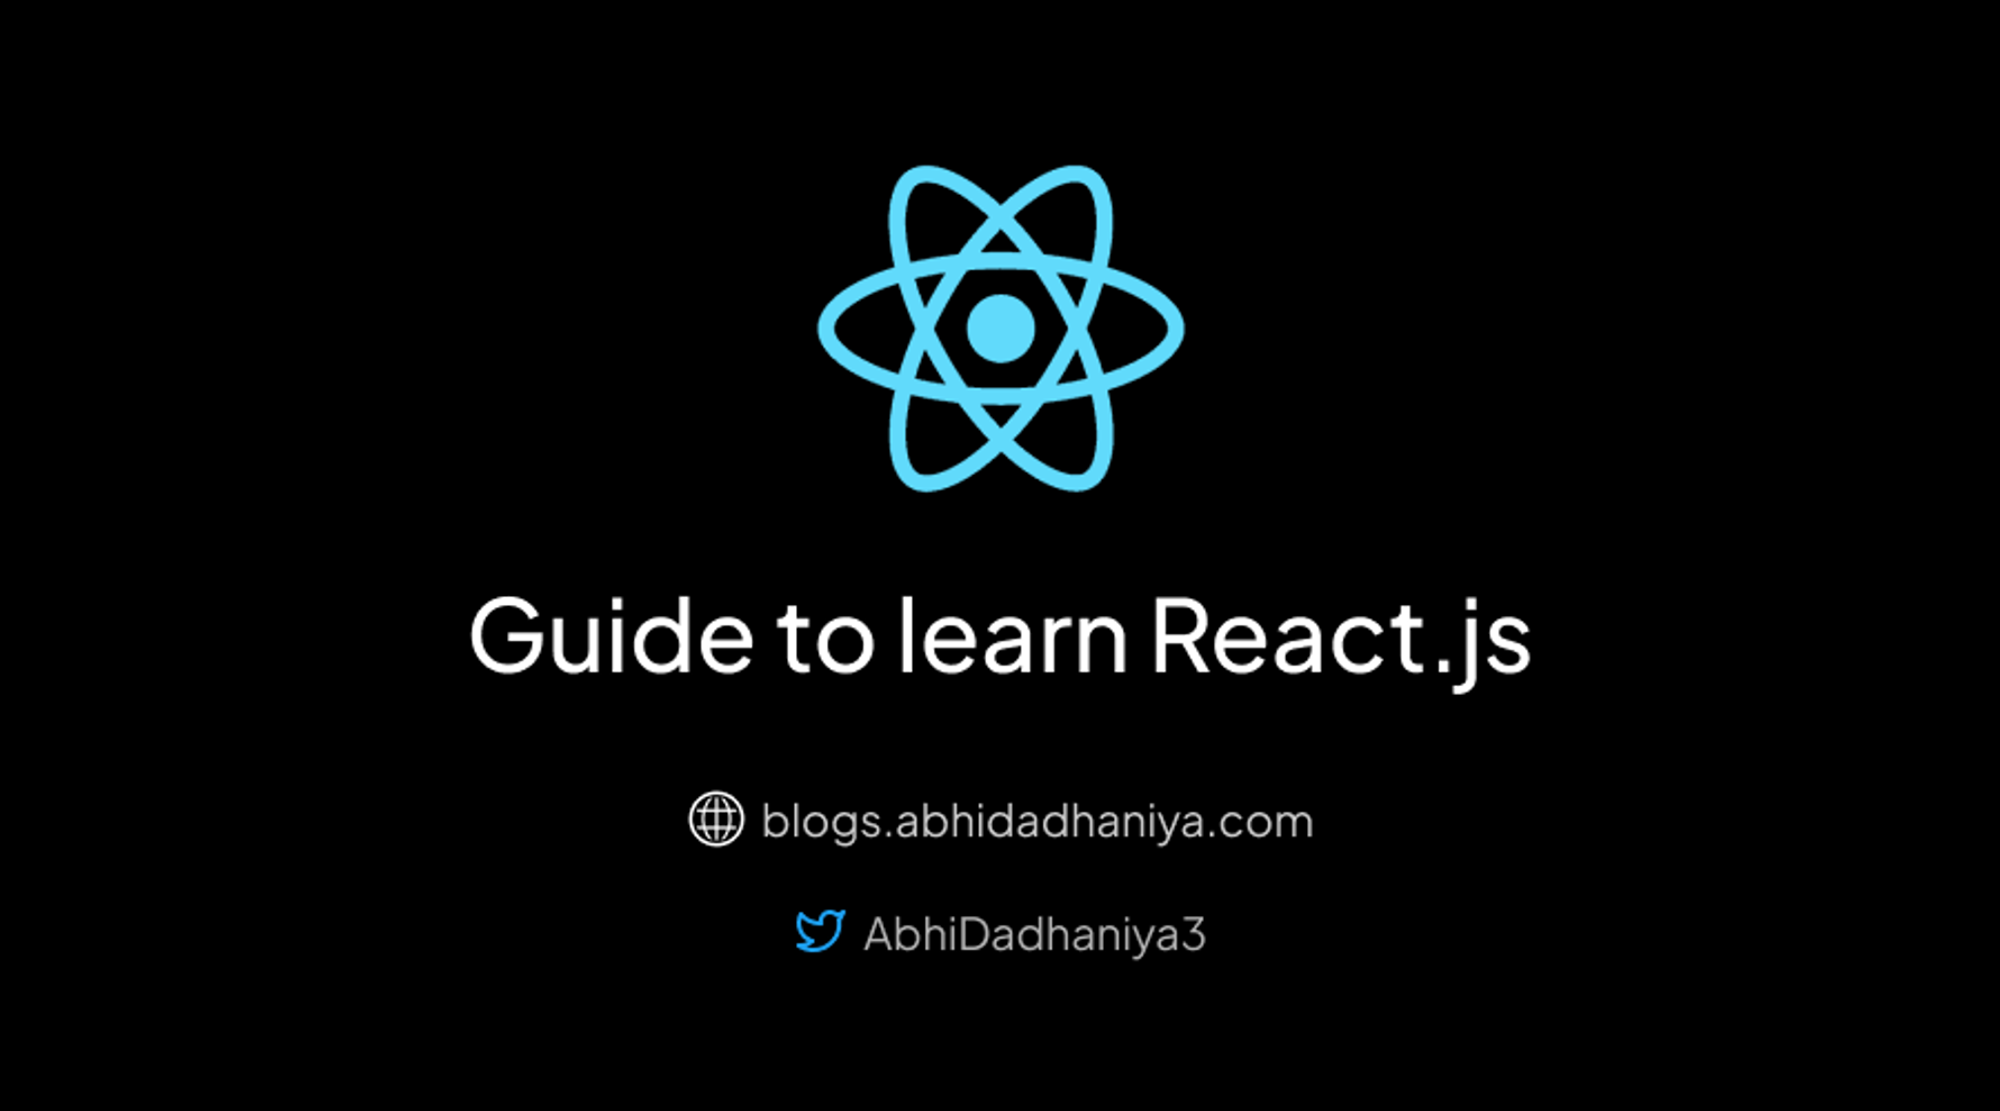 Guide to Learn React.js